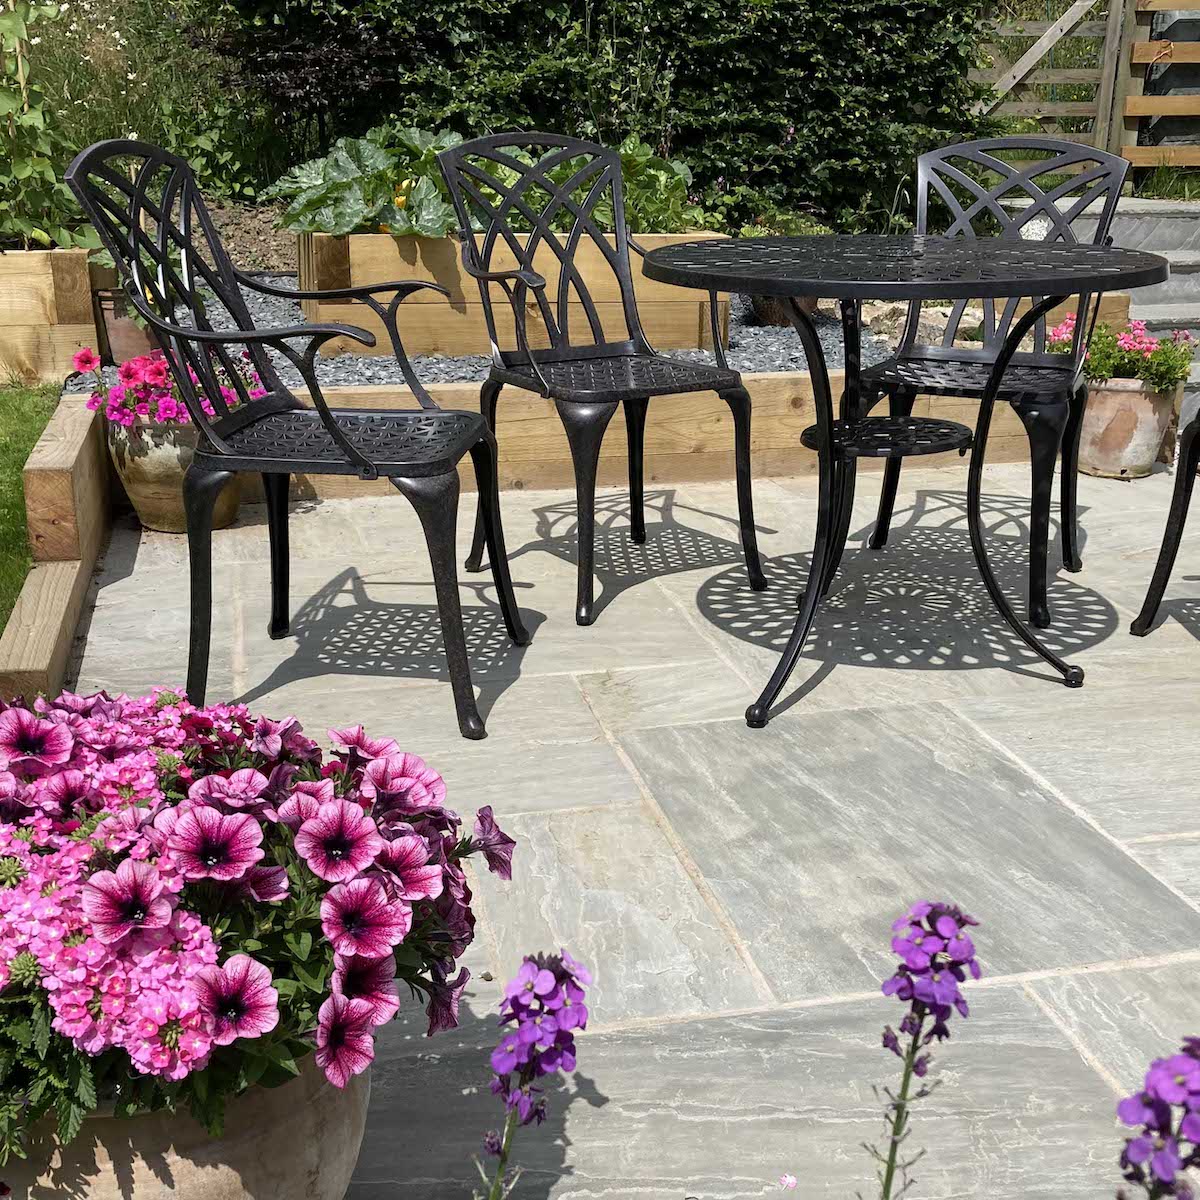 How do you decide which garden table set is best?